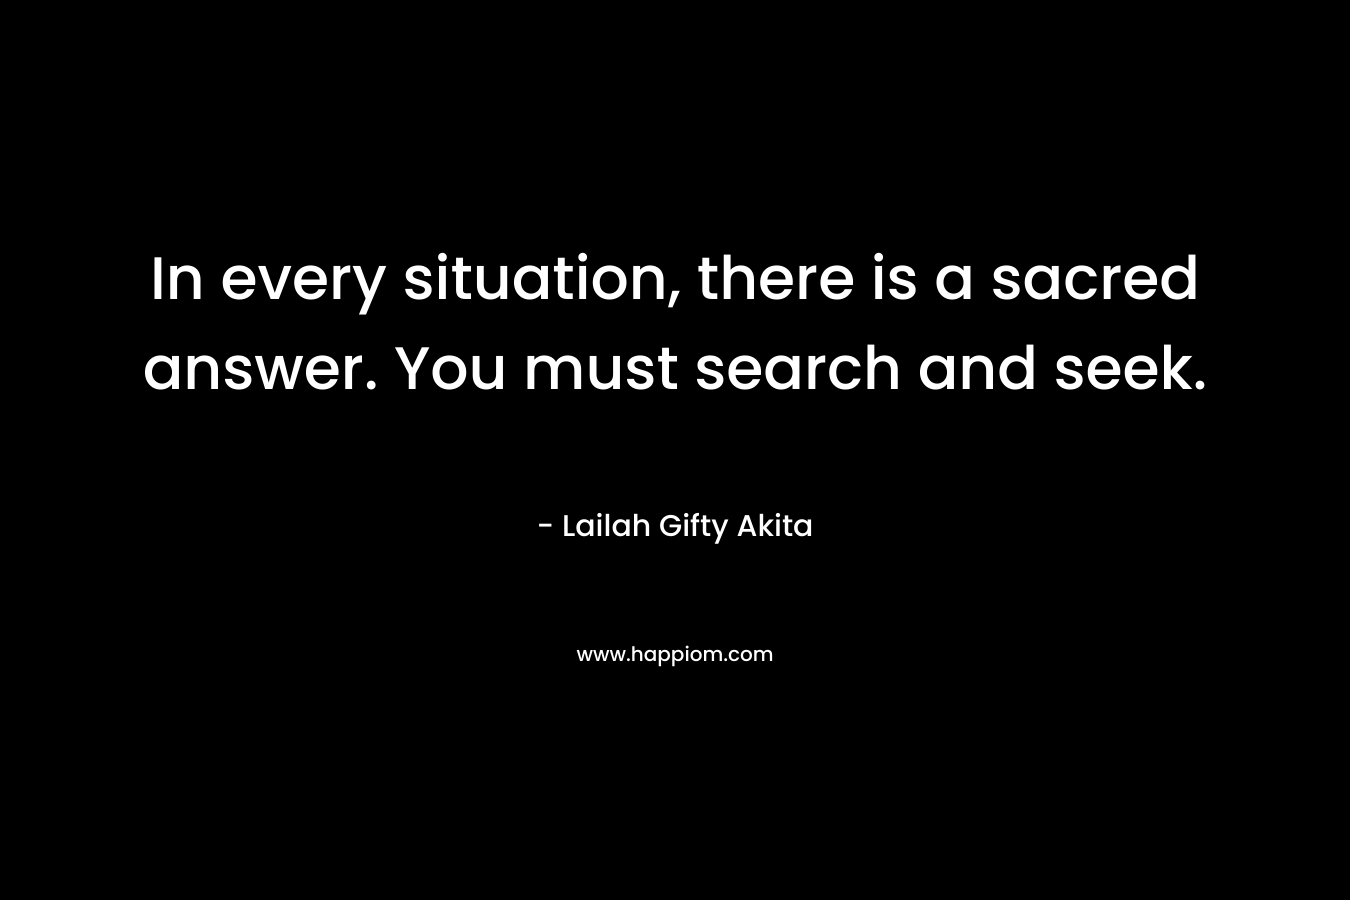 In every situation, there is a sacred answer. You must search and seek.